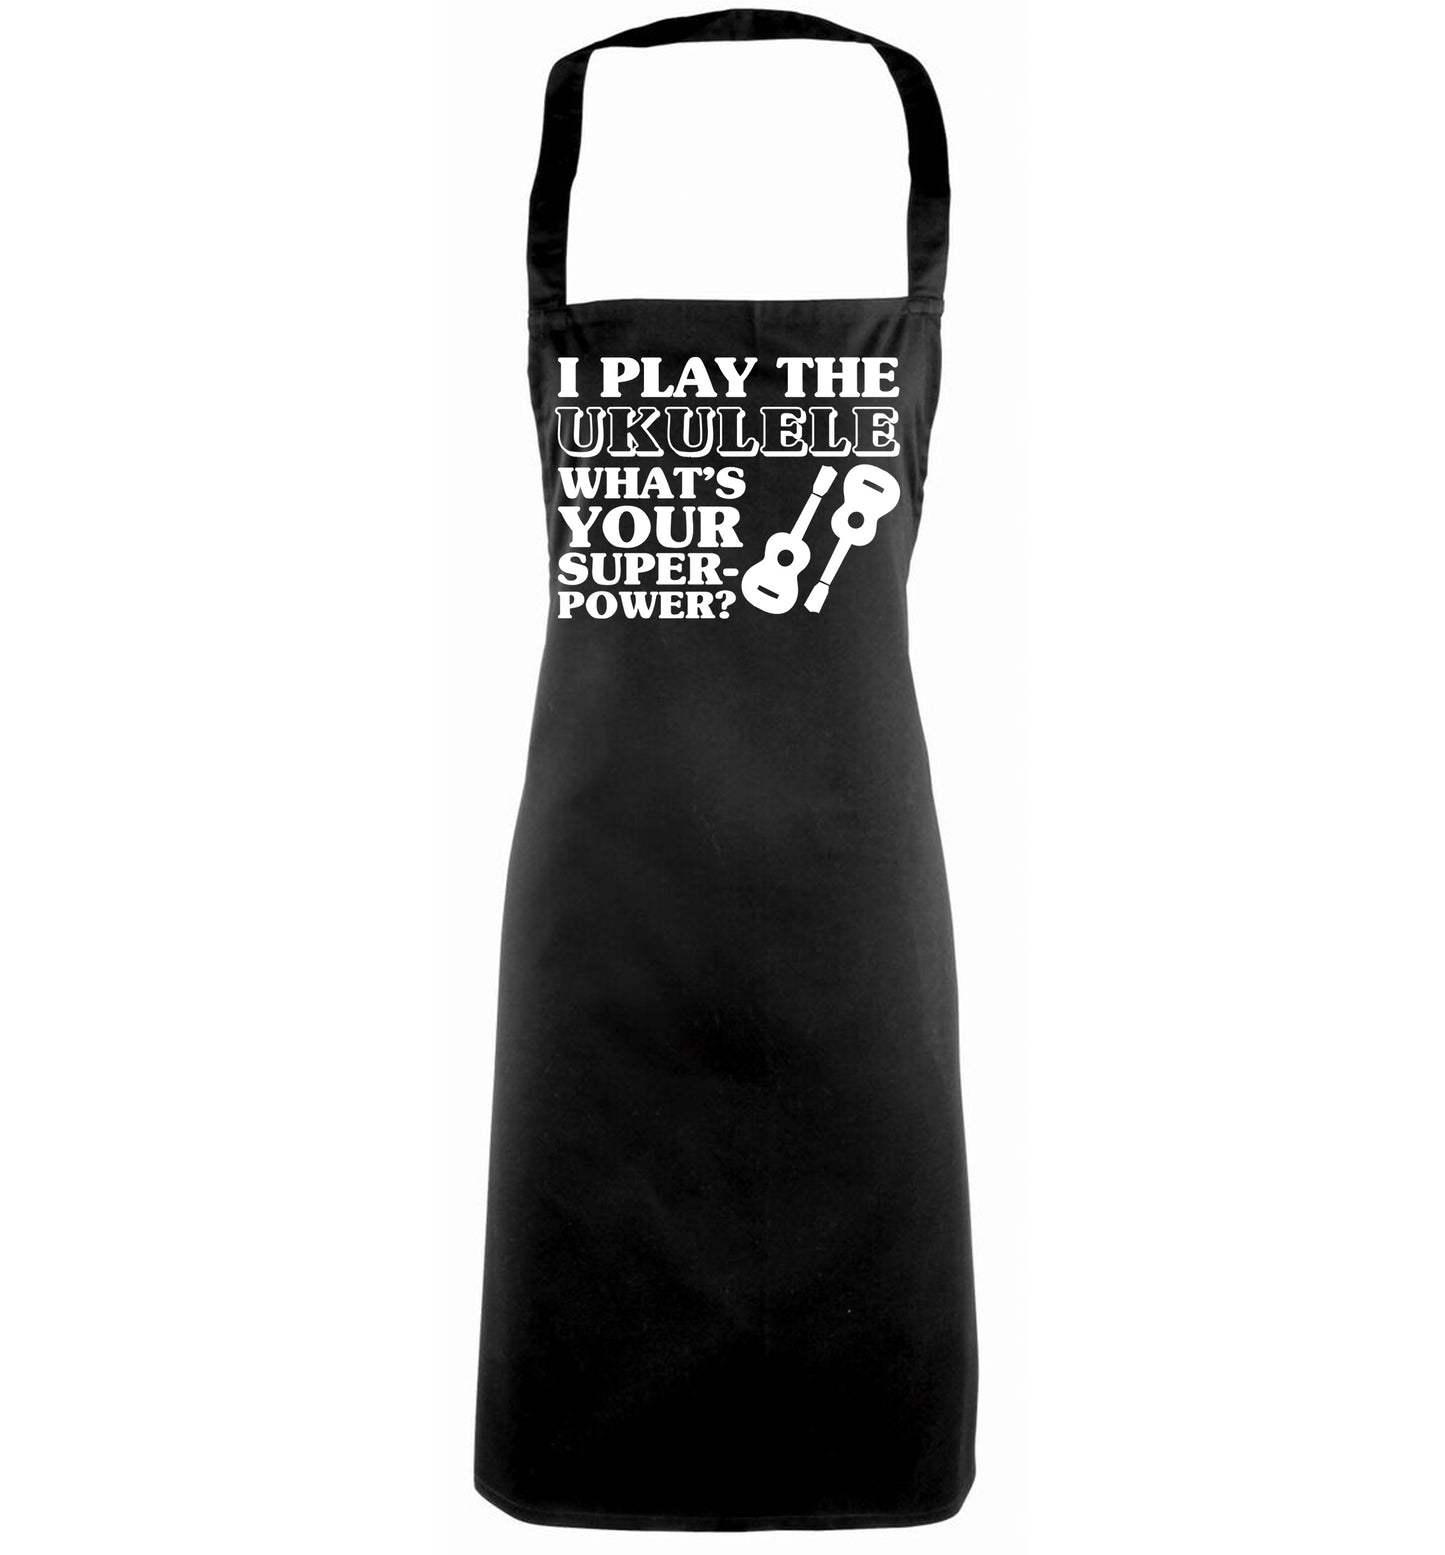 I play the ukulele what's your superpower? black apron